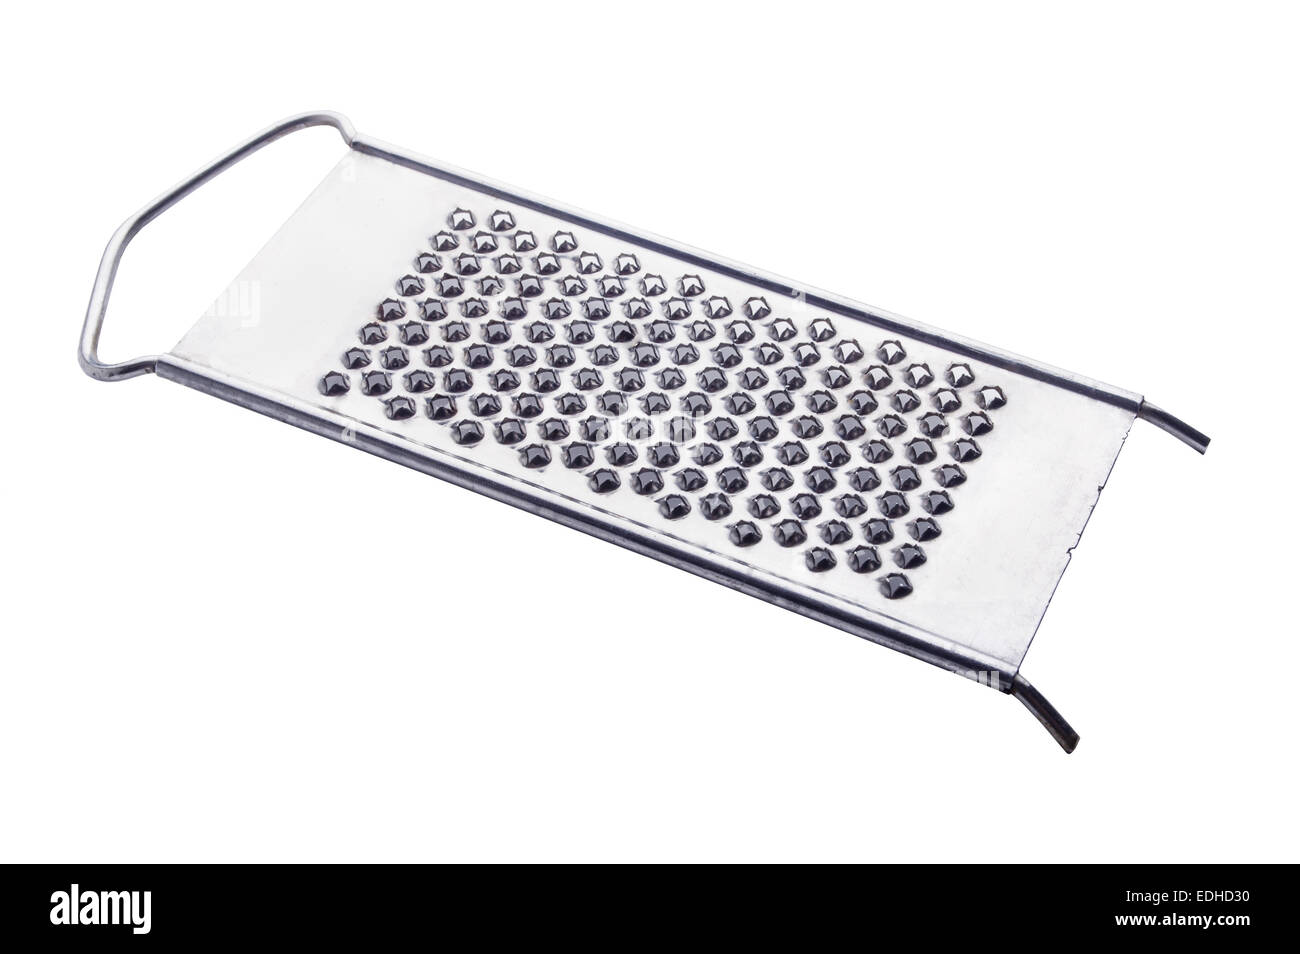 Isolated Rotary Cheese Grater Stock Photo - Download Image Now